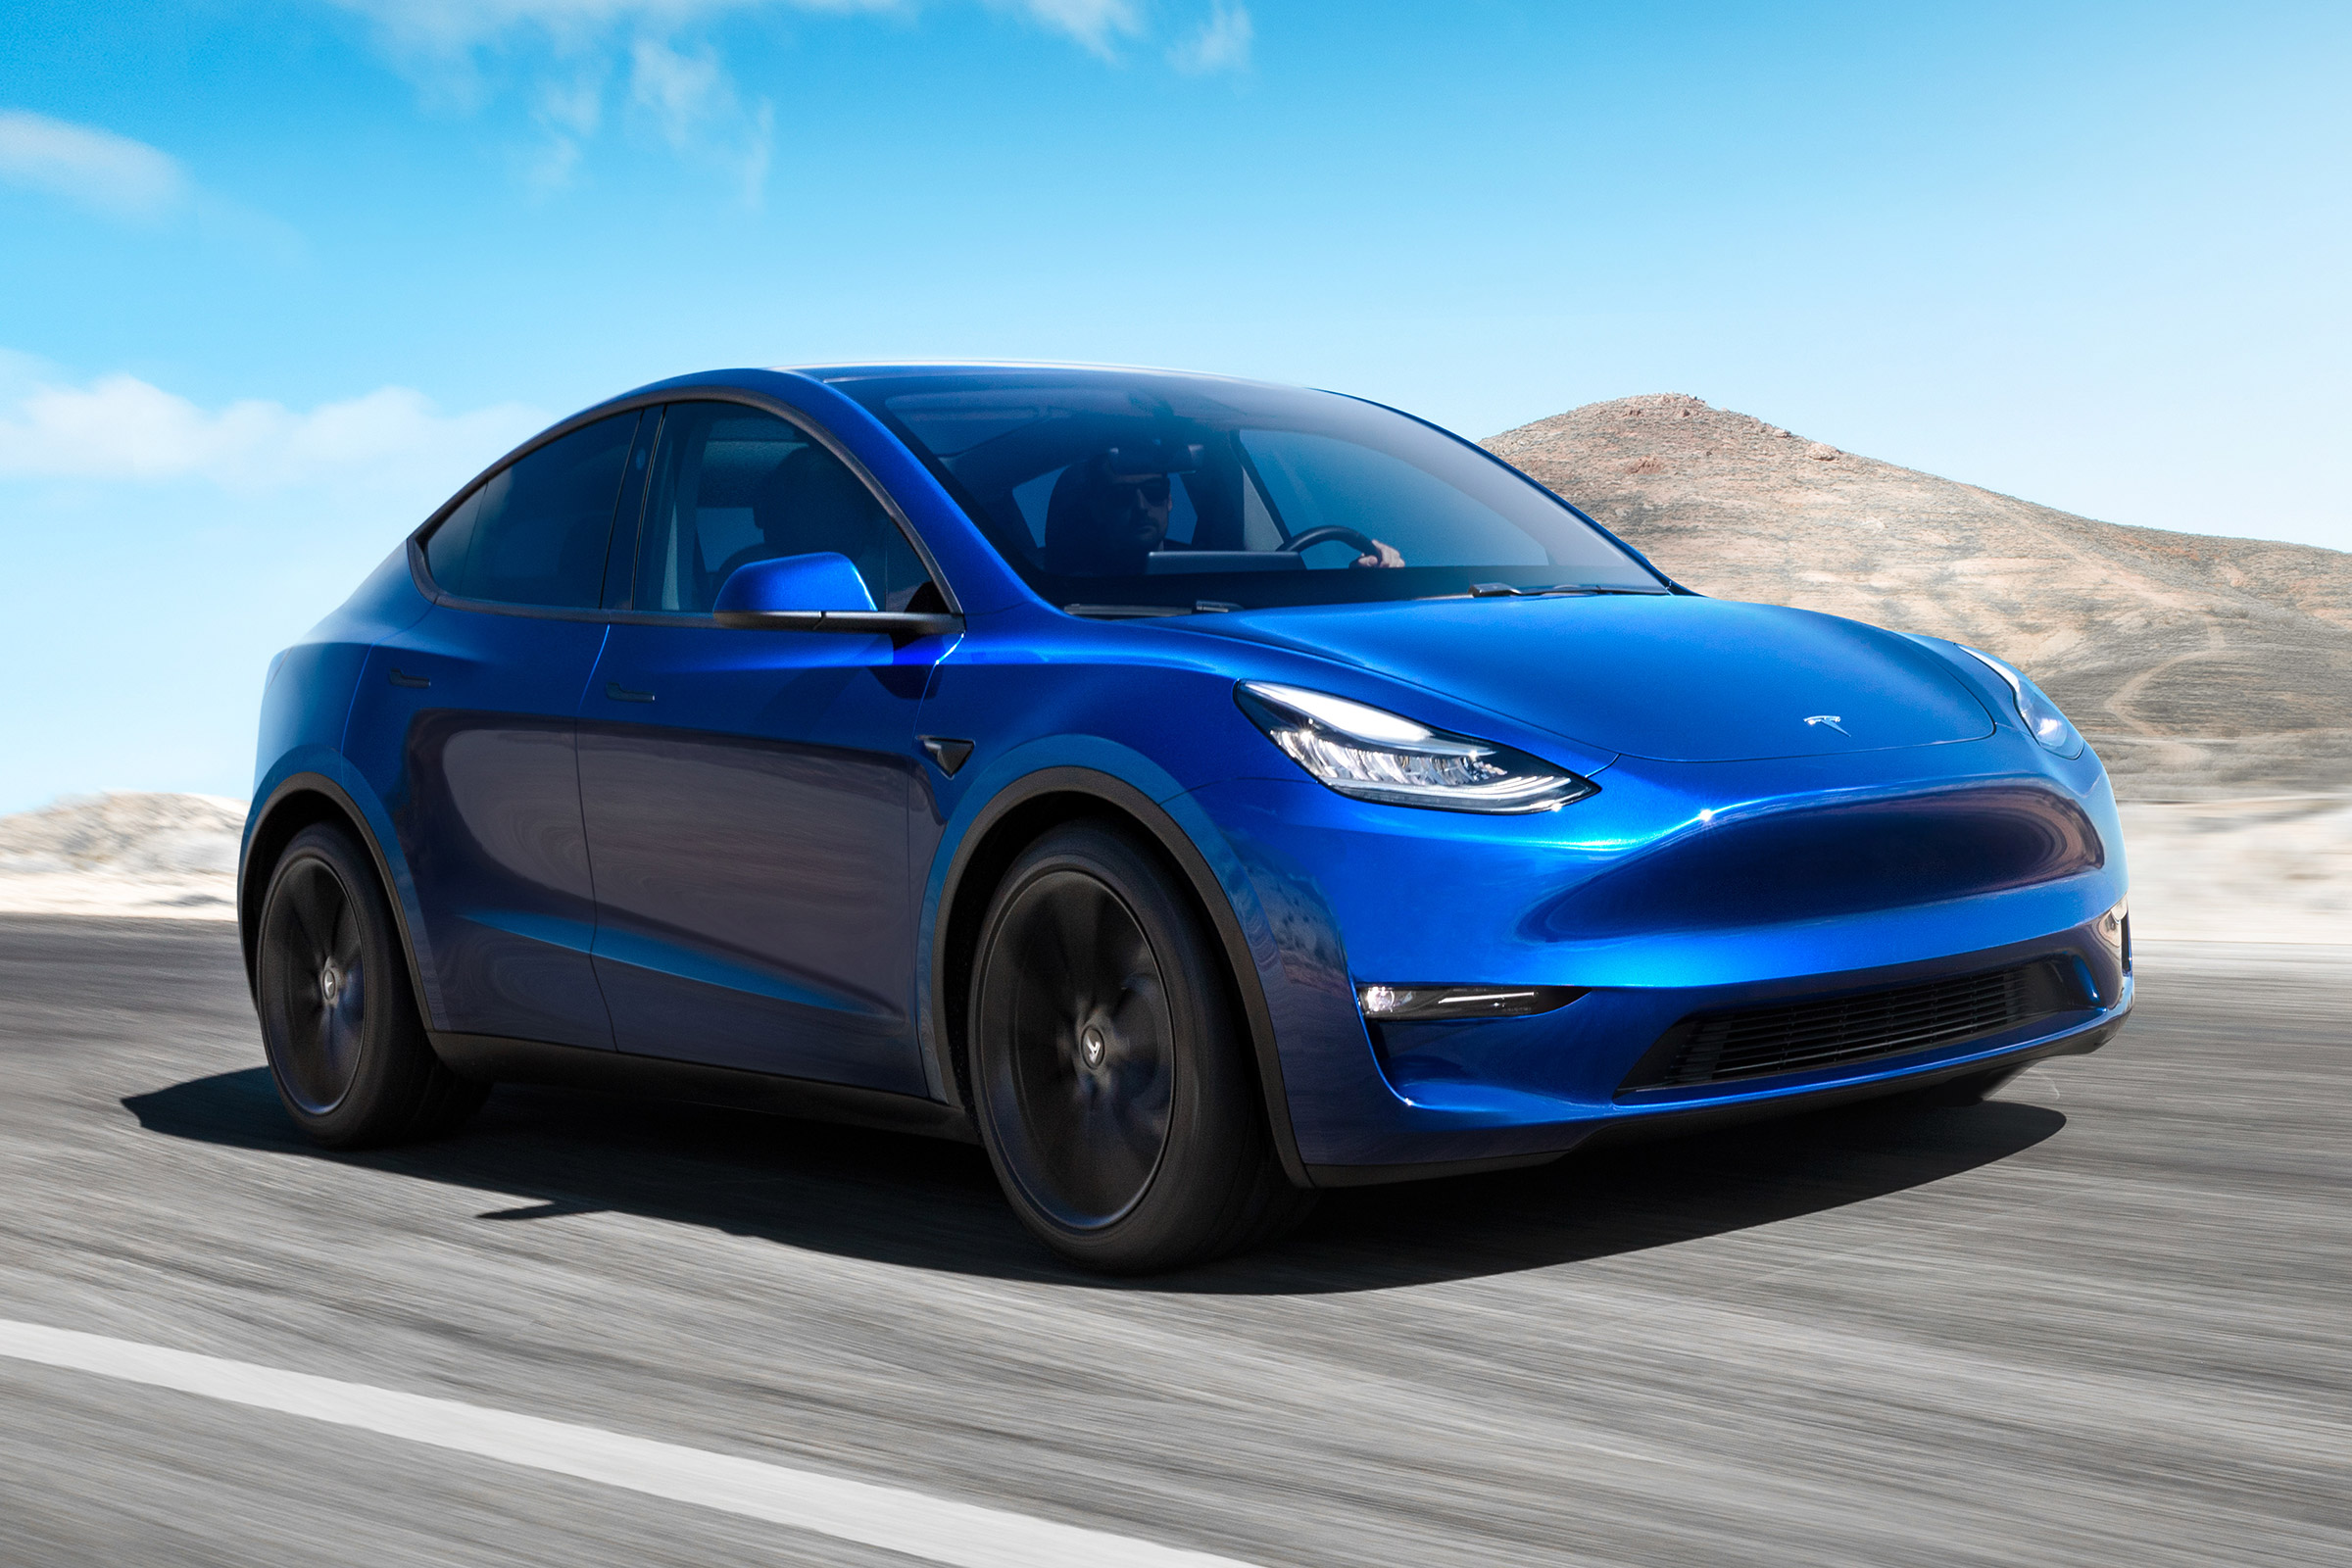 New 2020 Tesla Model Y Specs Prices And On Sale Date Auto Express